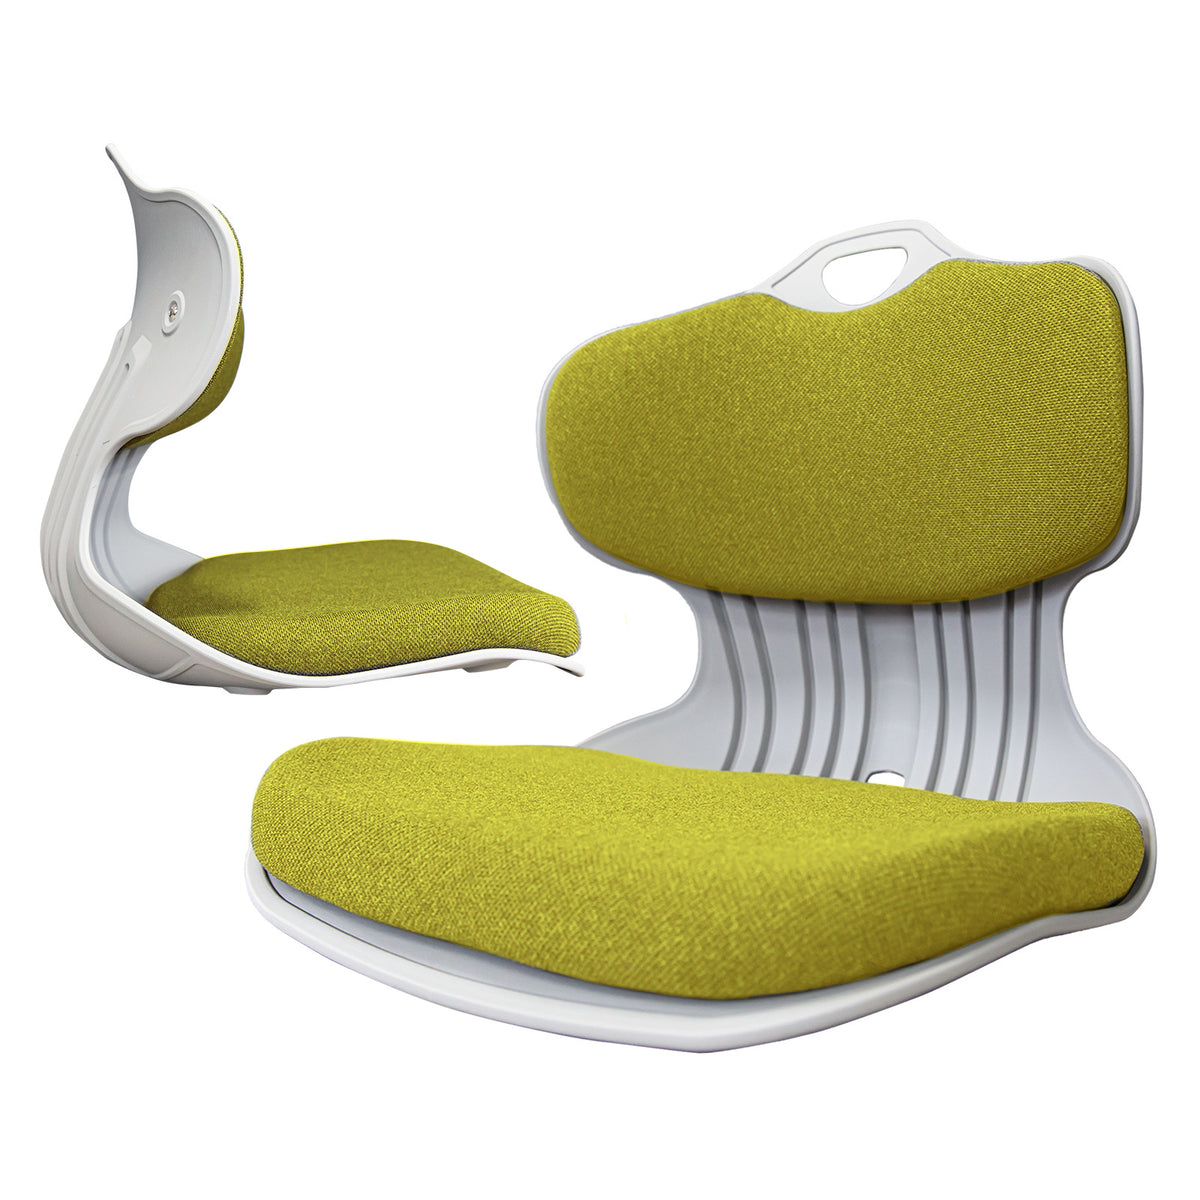 Samgong Posture Correction Slender Chair in Lime Set - 2 Pieces - Notbrand